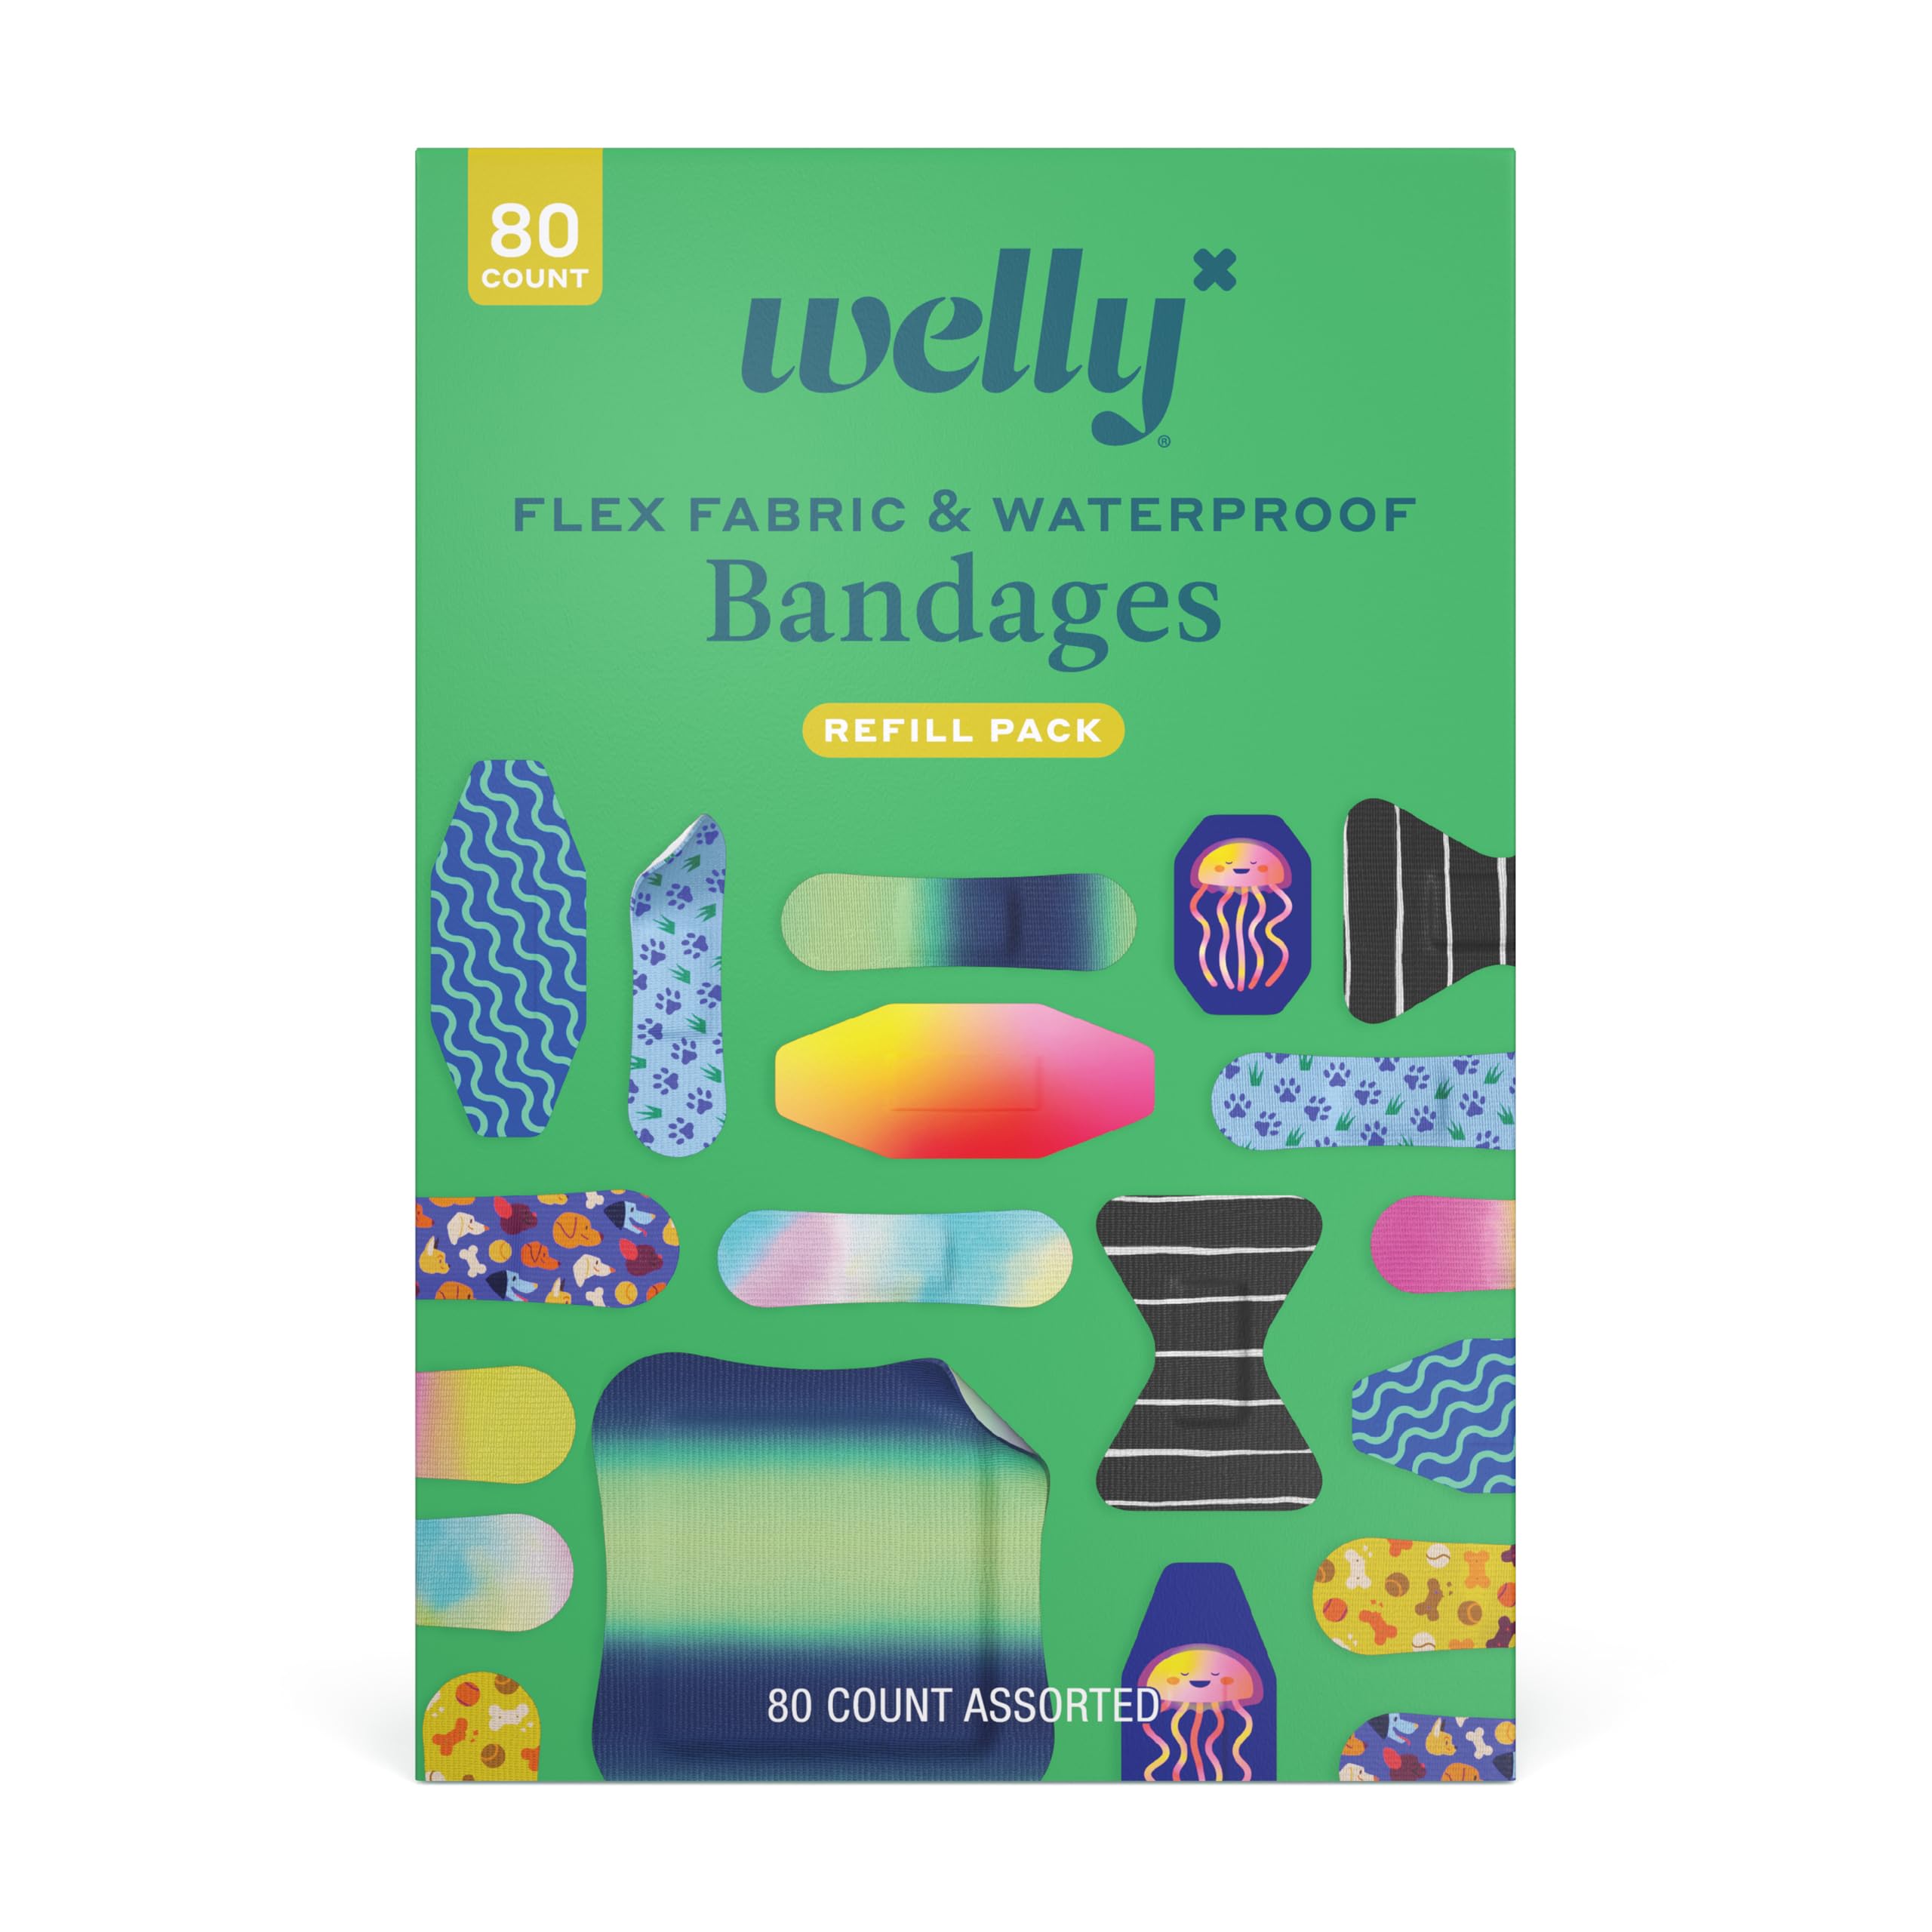 Welly Bandage Family Pack | Adhesive Flexible Fabric & Waterproof Bandages | Assorted Shapes and Patterns for Minor Cuts, Scrapes, and Wounds - 80 Count